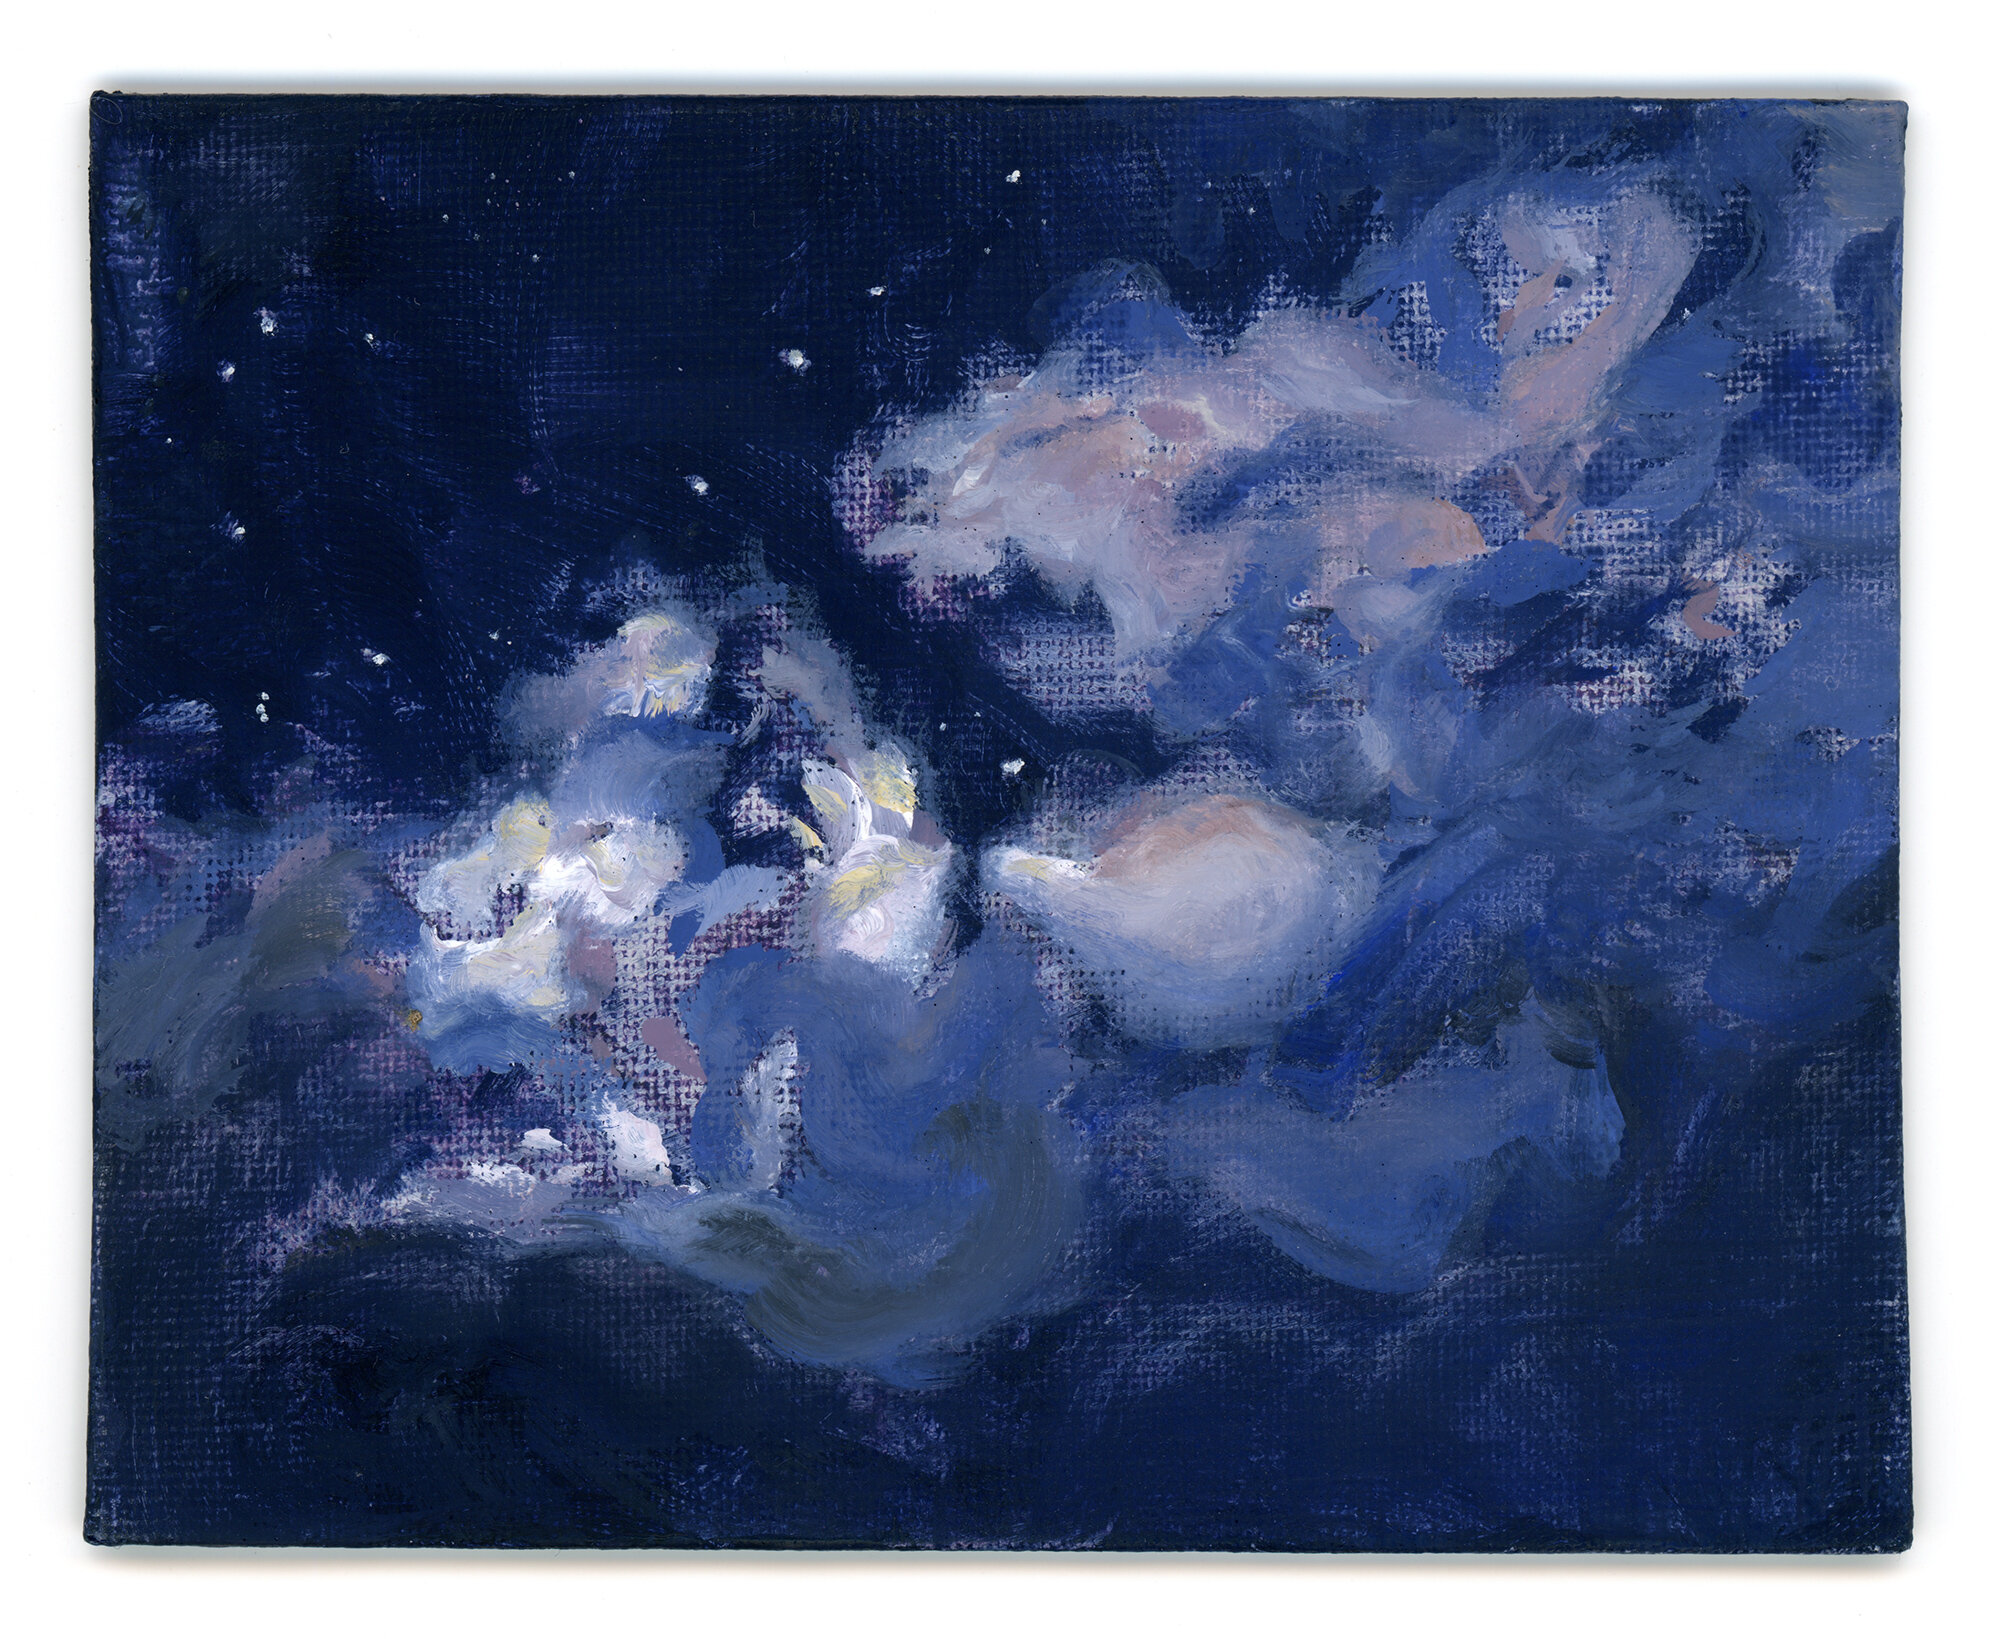  Nocturne Cloud, 2020. 4.75 x 5.9 in. Oil on canvas board. 